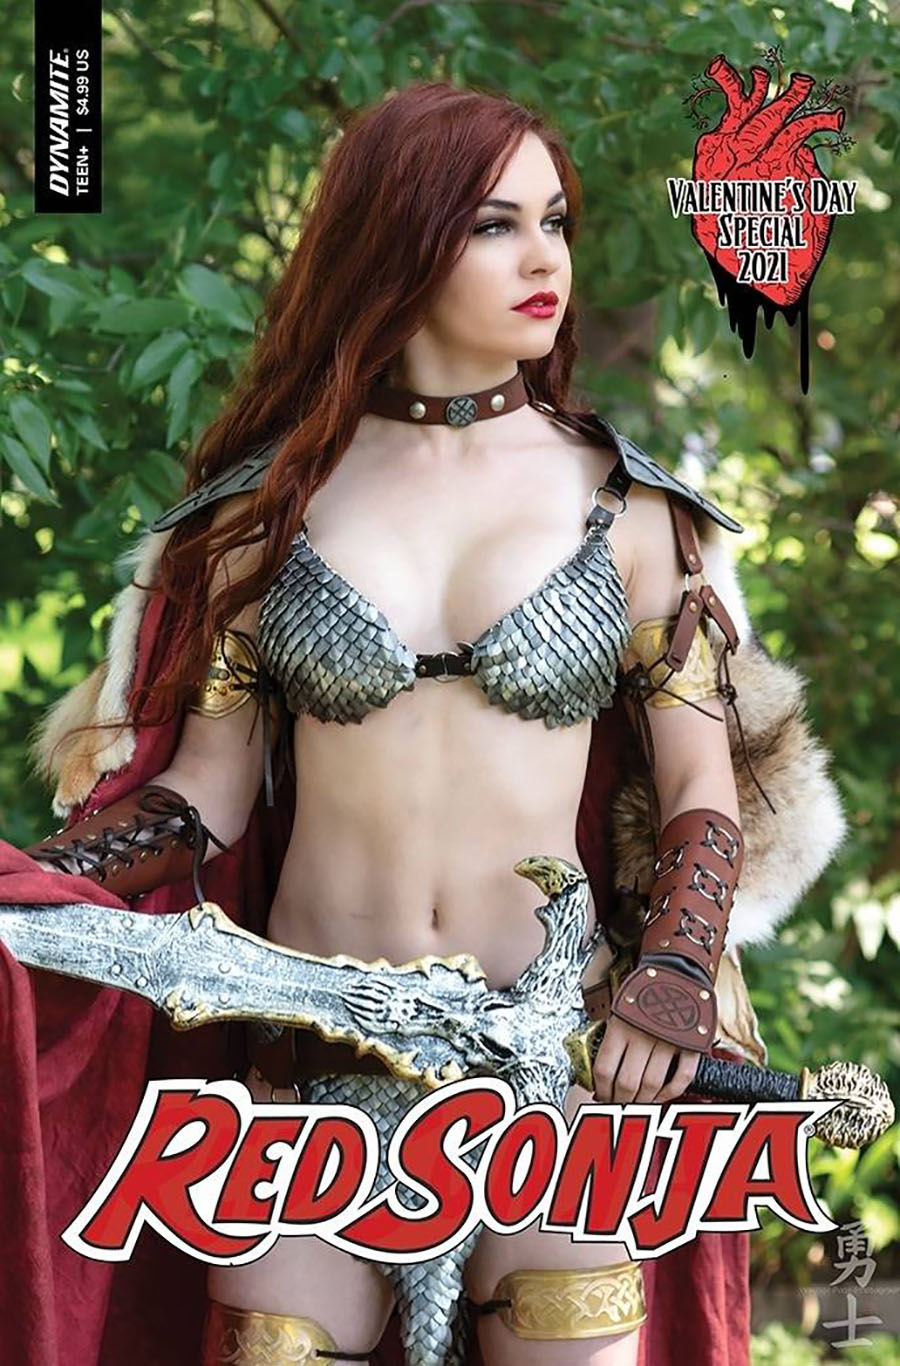 Red Sonja Valentines Special One Shot Cover C Variant Savannah Polson Cosplay Photo Cover